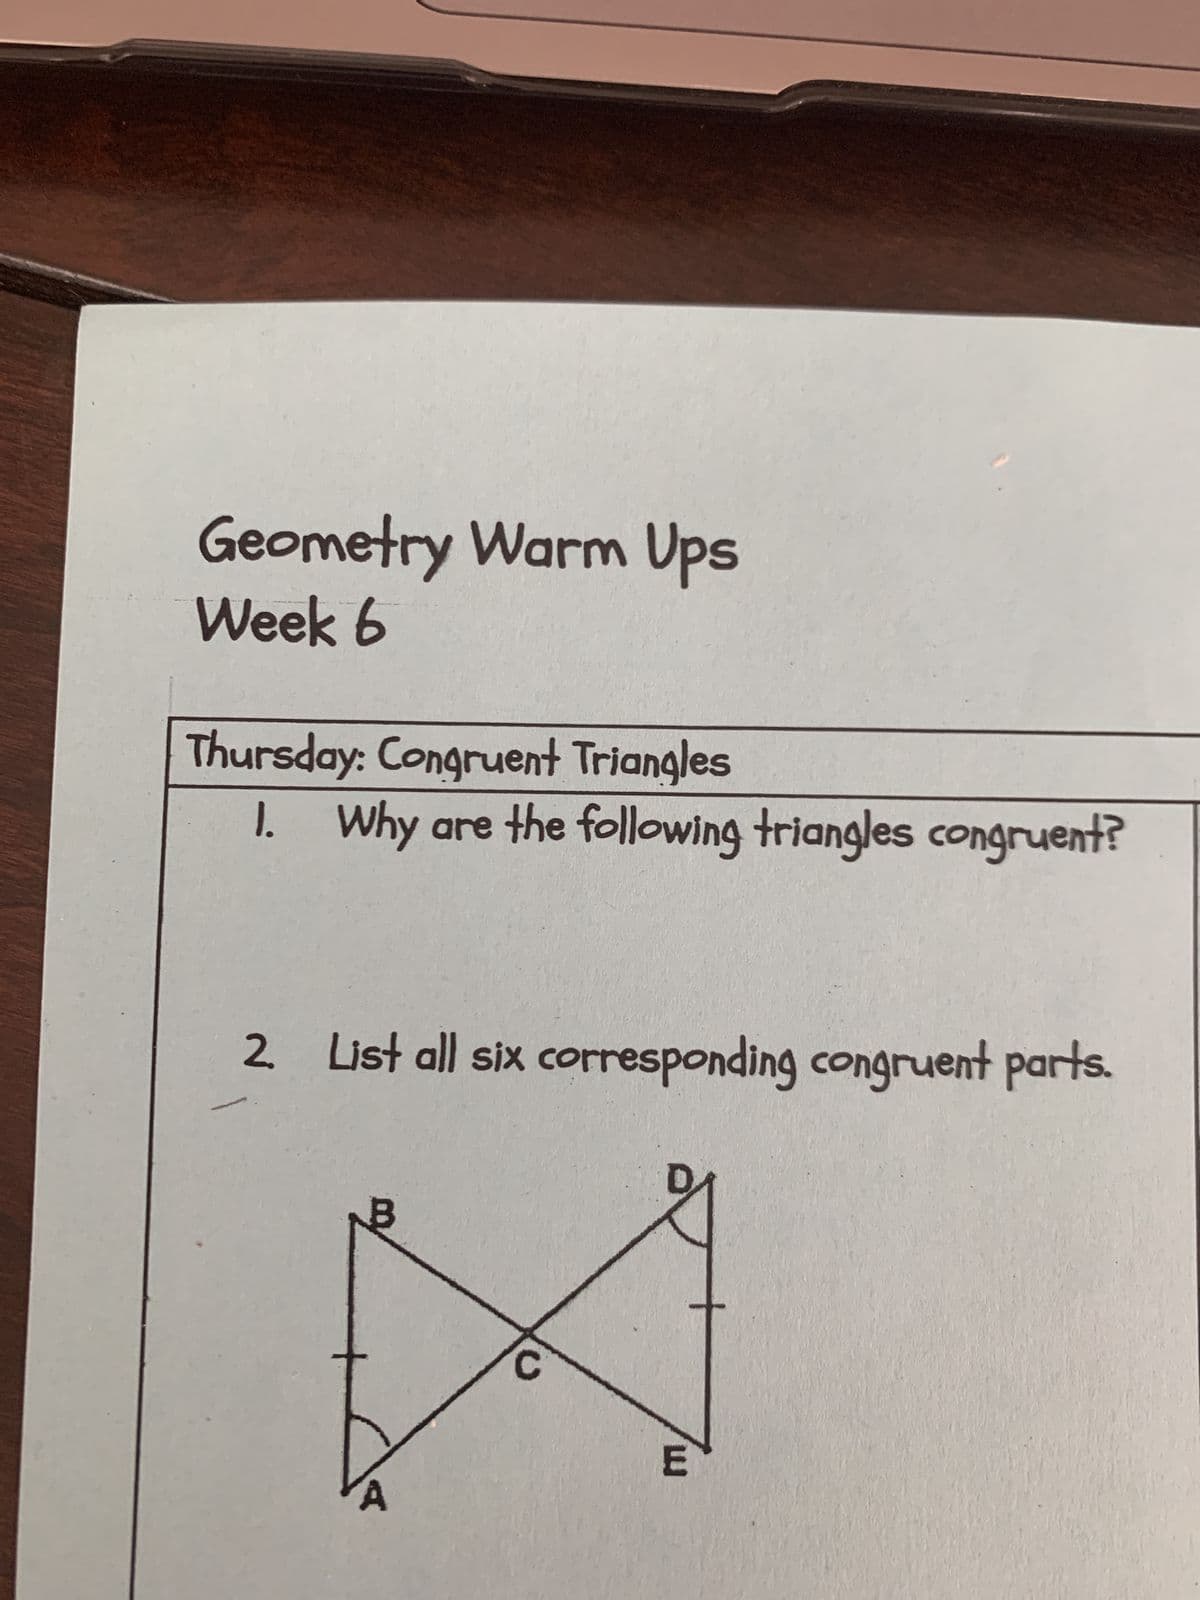 Geometry Warm Ups
Week 6
Thursday: Congruent Triangles
1. Why are the following triangles congruent?
2. List all six corresponding congruent parts.
E